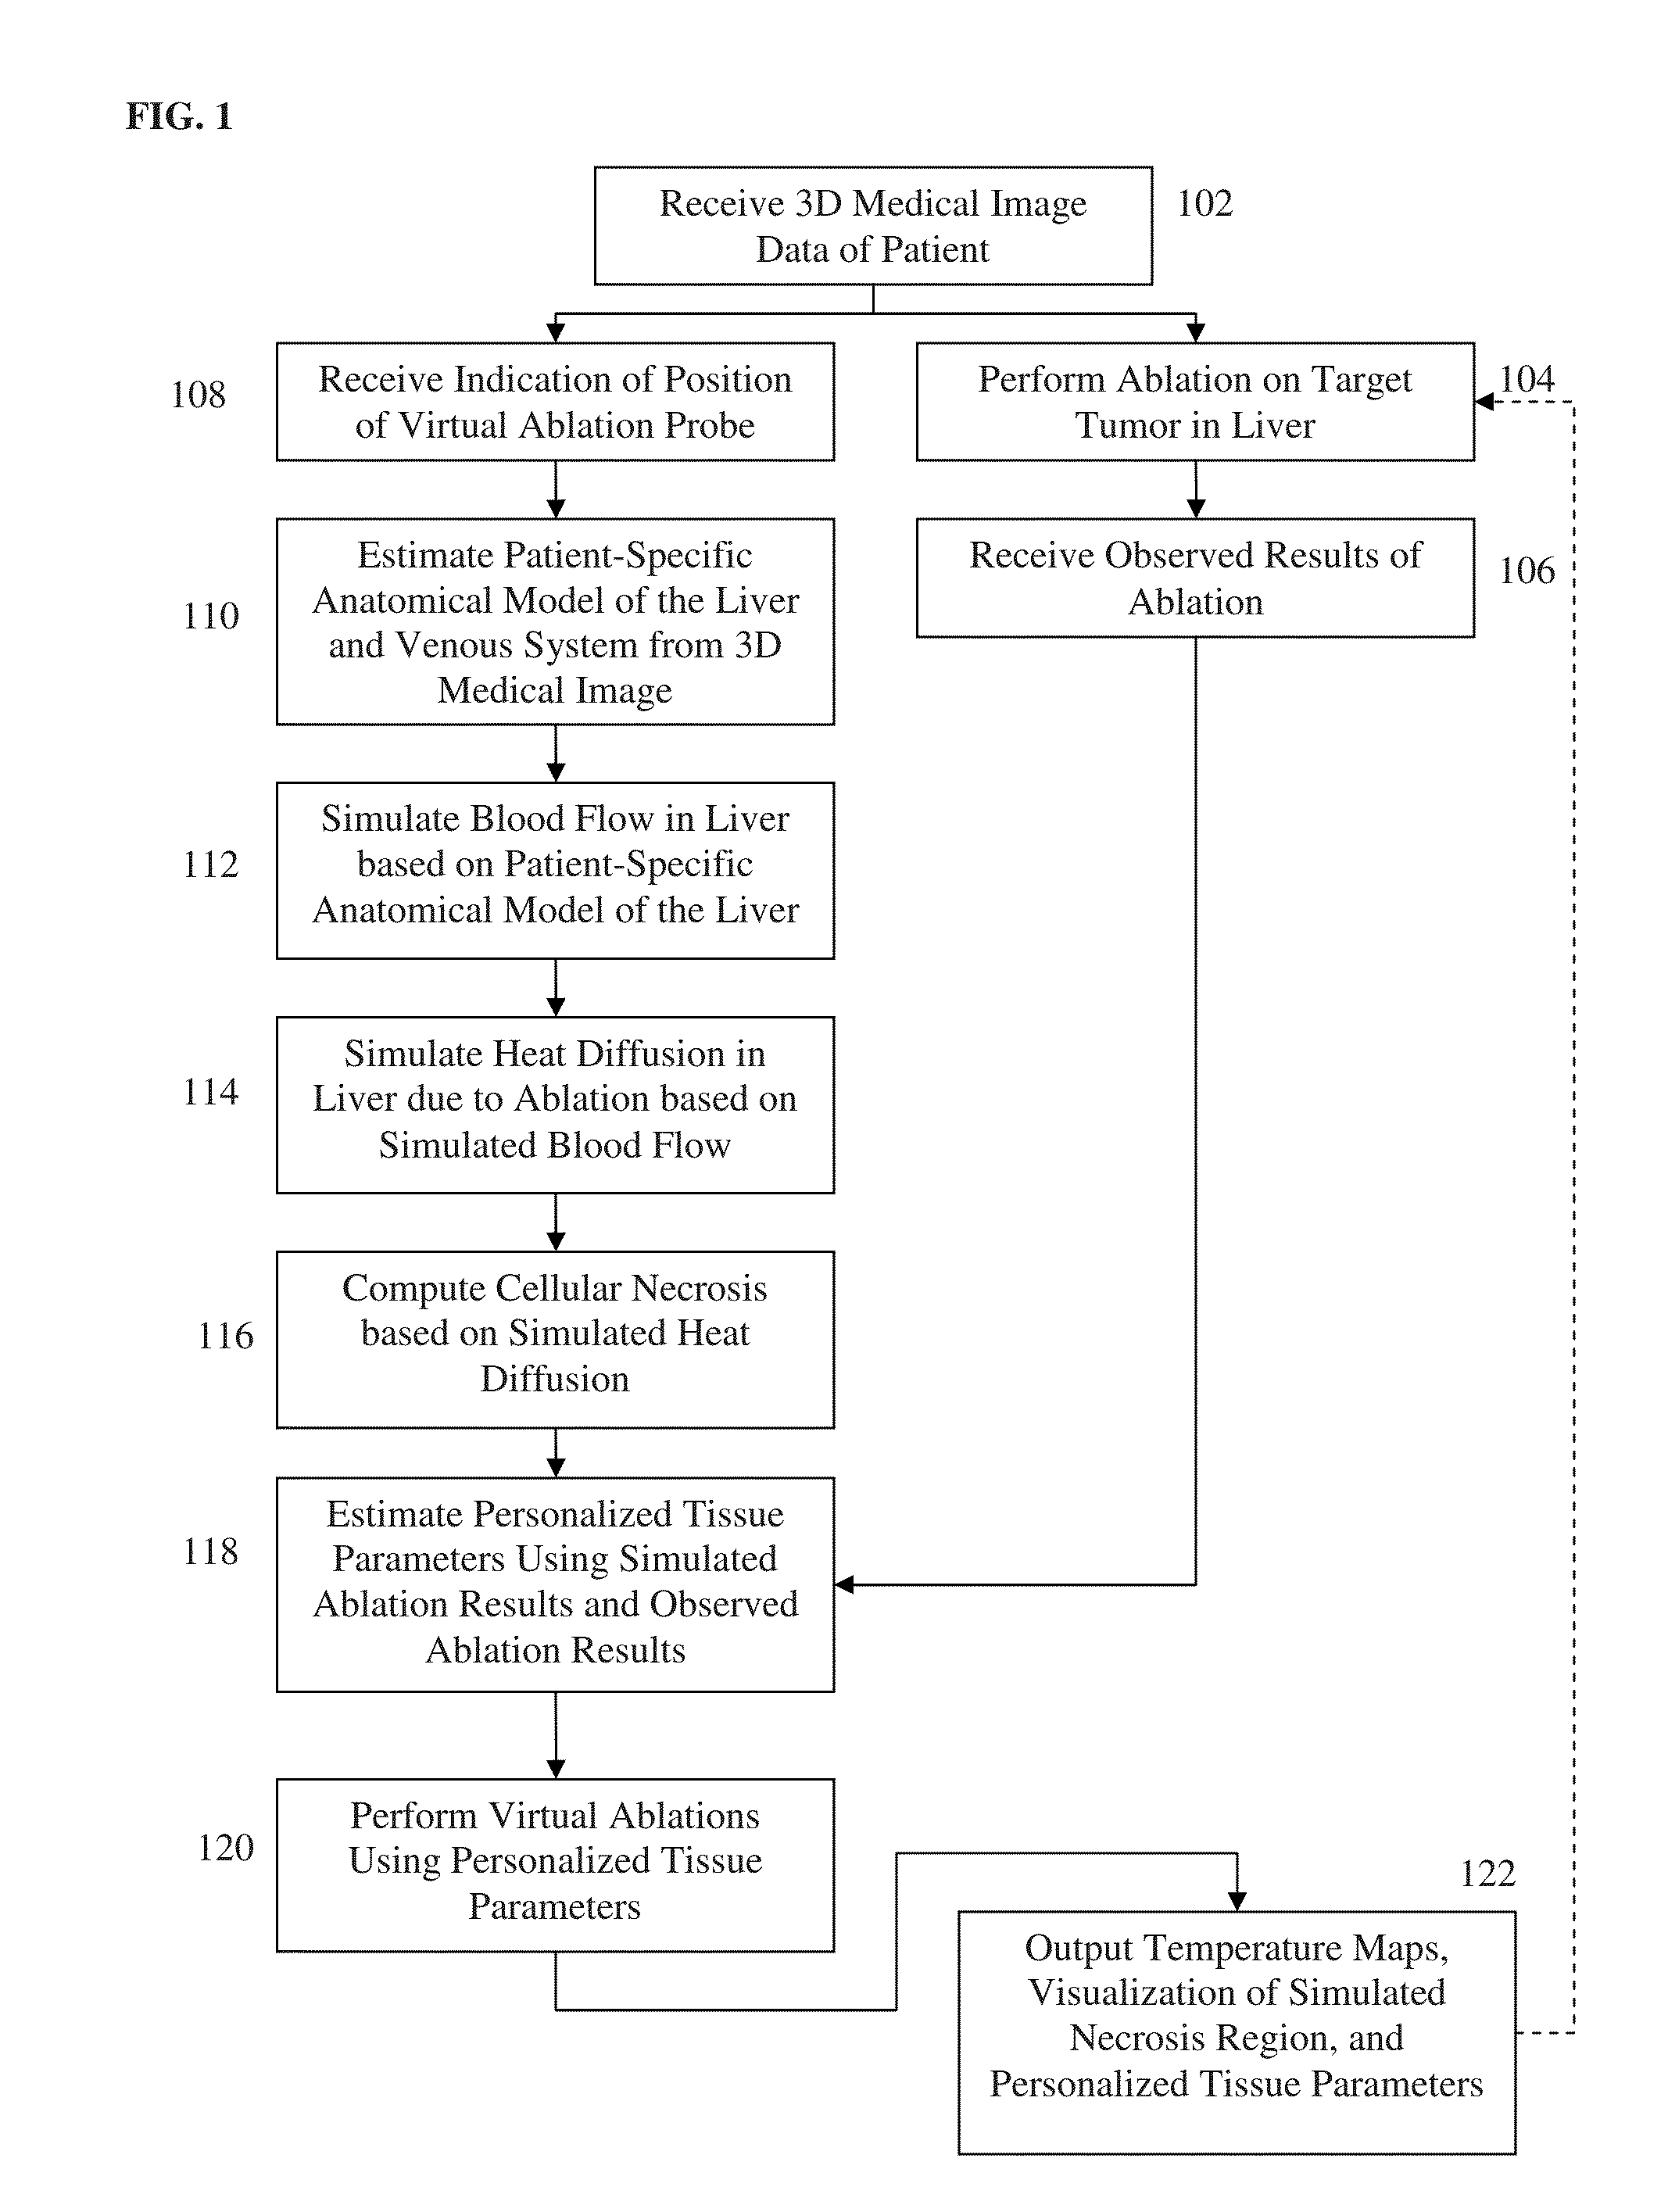 System and Method for Personalized Computation of Tissue Ablation Extent Based on Medical Images